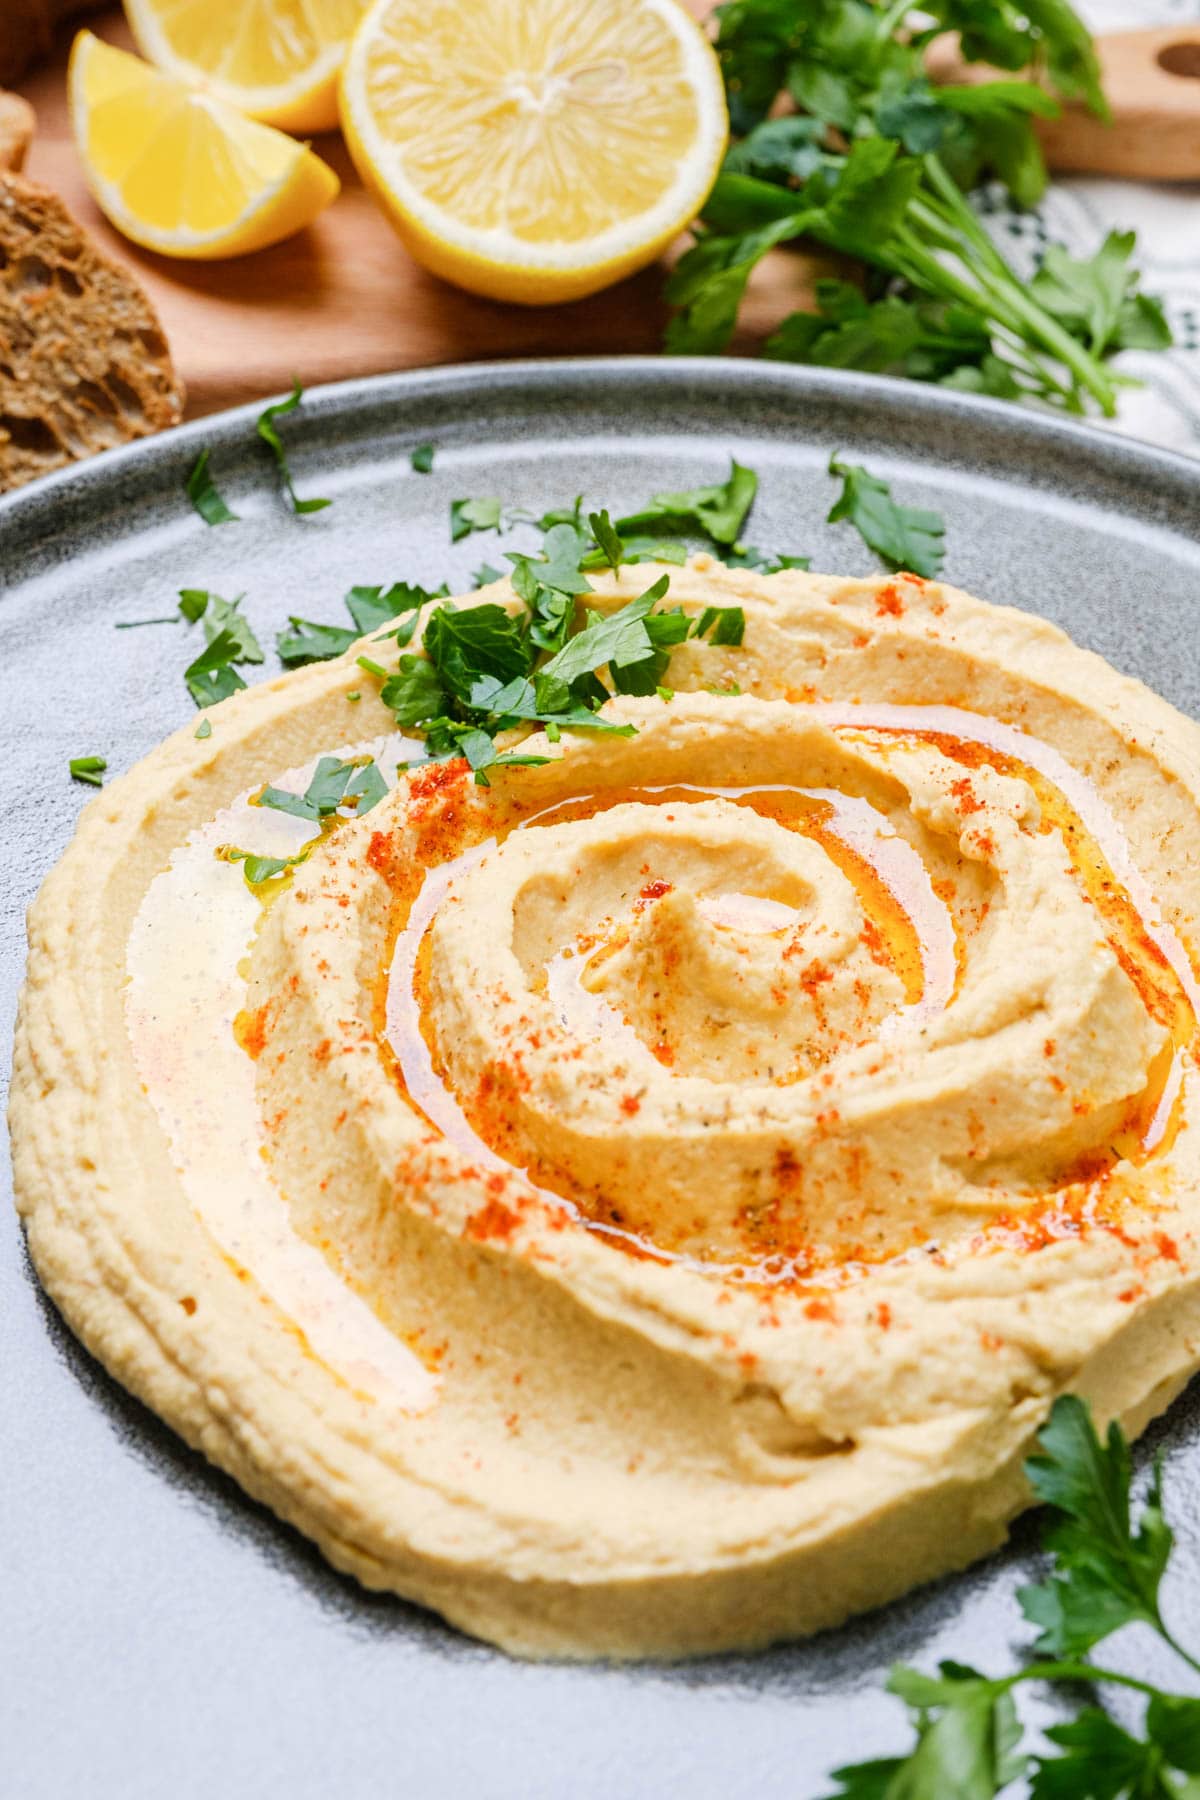 Instant Pot chickpea hummus with lemon on the side